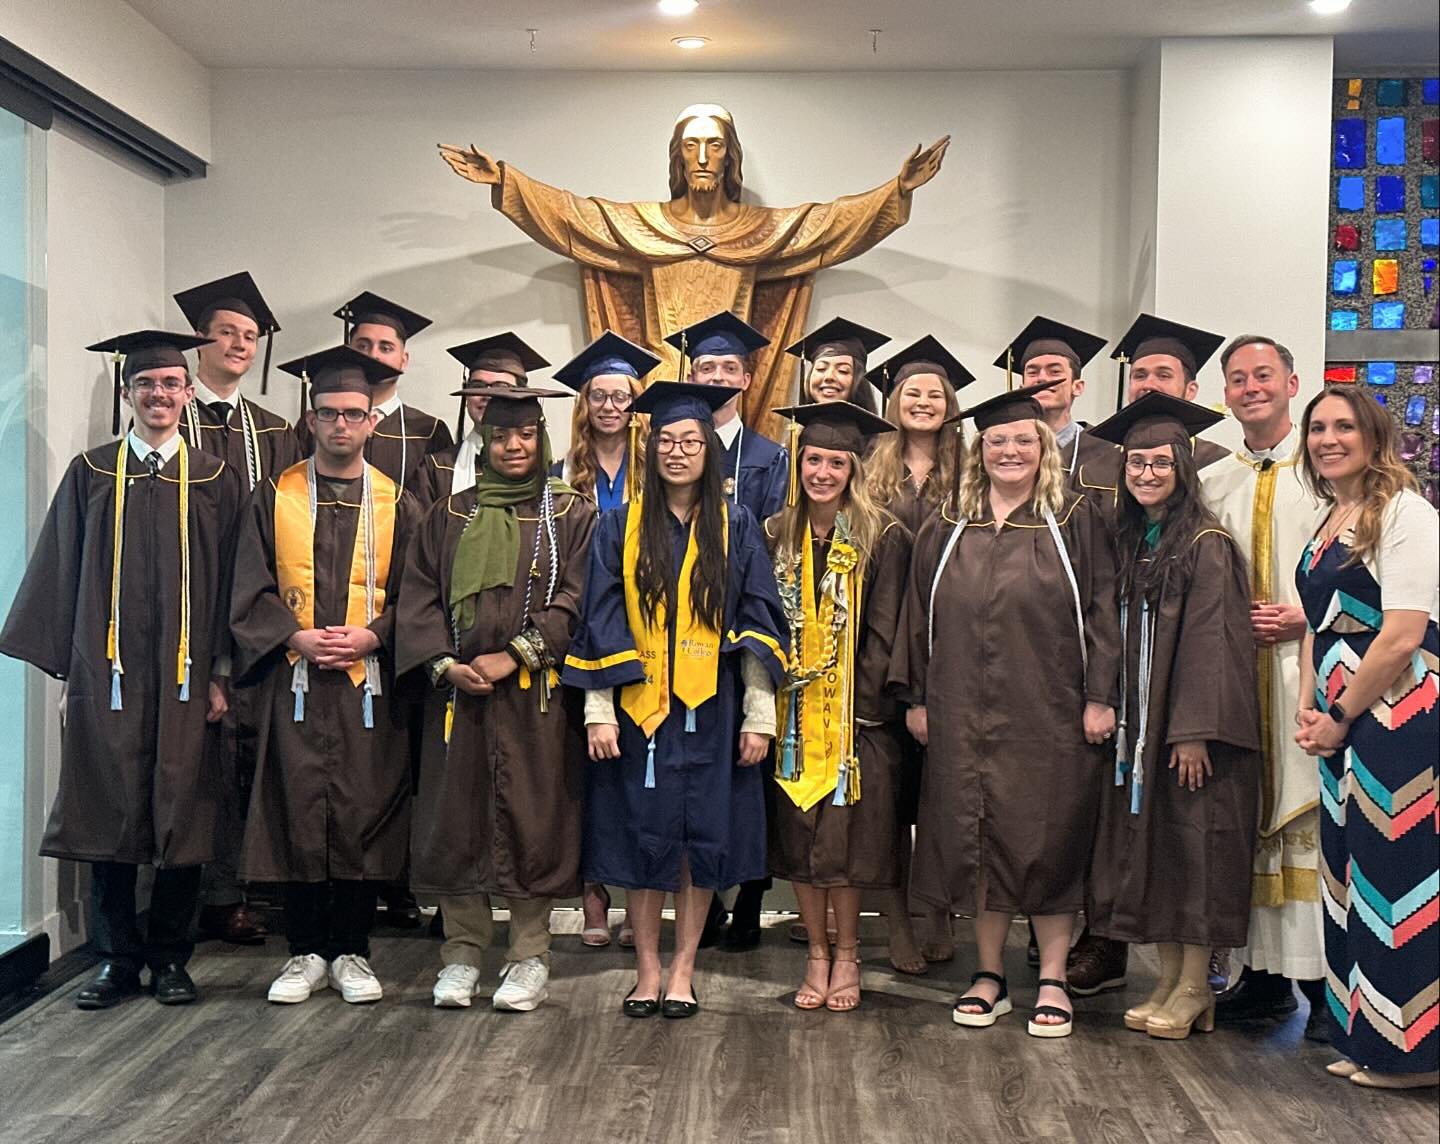 Today @rowanuniversity celebrated its Commencement ceremony and we celebrated the St. Bridget University Parish&rsquo;s Baccalaureate Mass. We honored the graduates from the Newman House graduating from Rowan University and also Rowan College of Sout